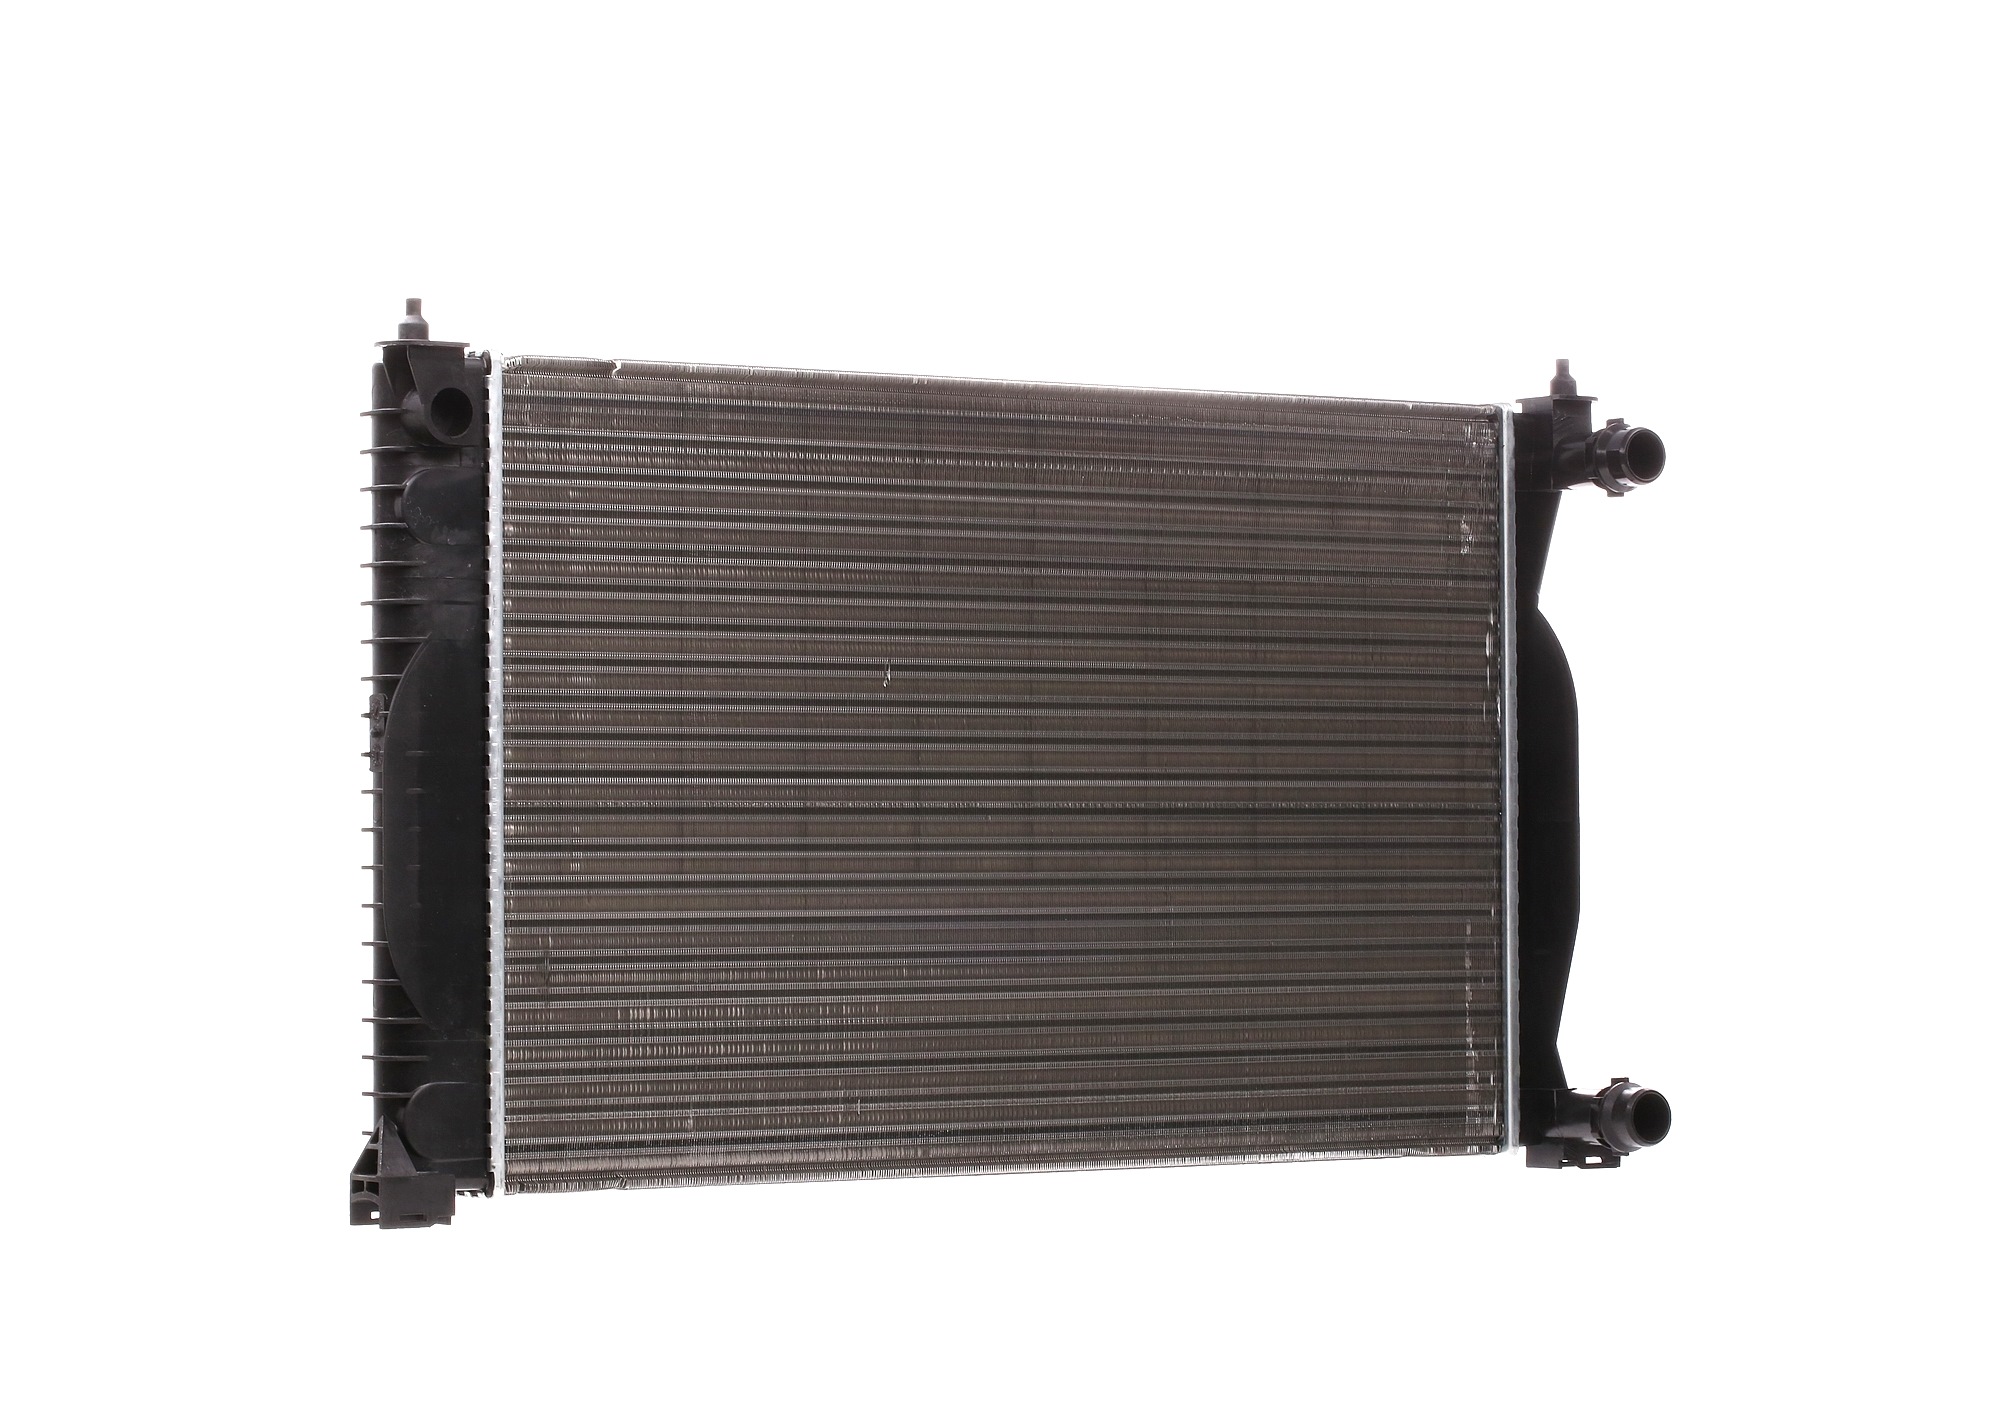 376766264 MAHLE ORIGINAL for vehicles with/without air conditioning, 630, 632 x 408, 414 x 26, 27 mm, Manual Transmission, Mechanically jointed cooling fins Radiator CR 1417 000S buy